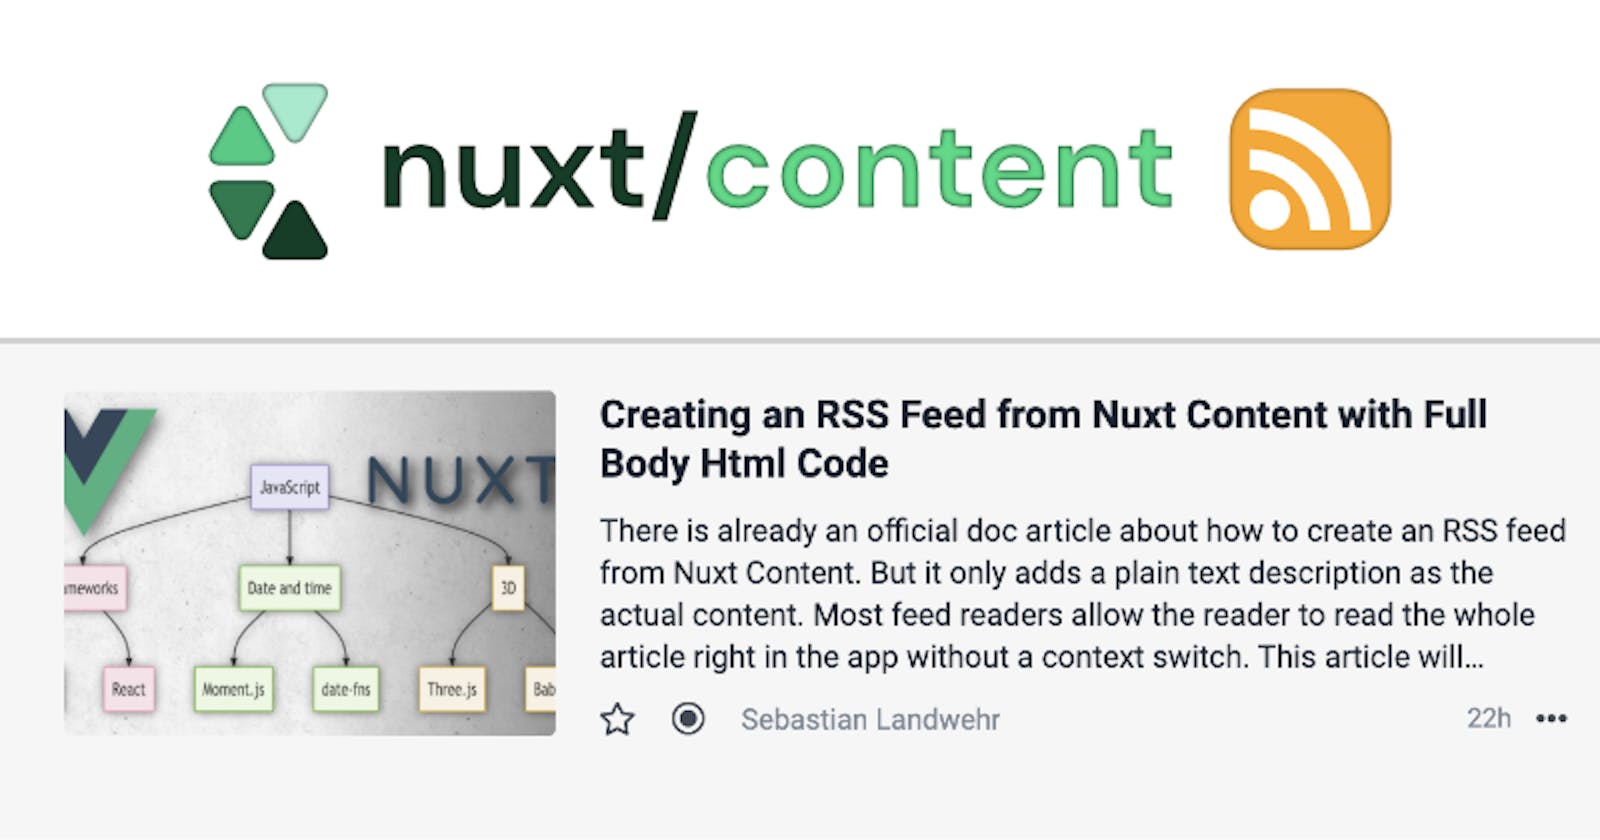 Creating an RSS Feed from Nuxt Content with Full Body HTML